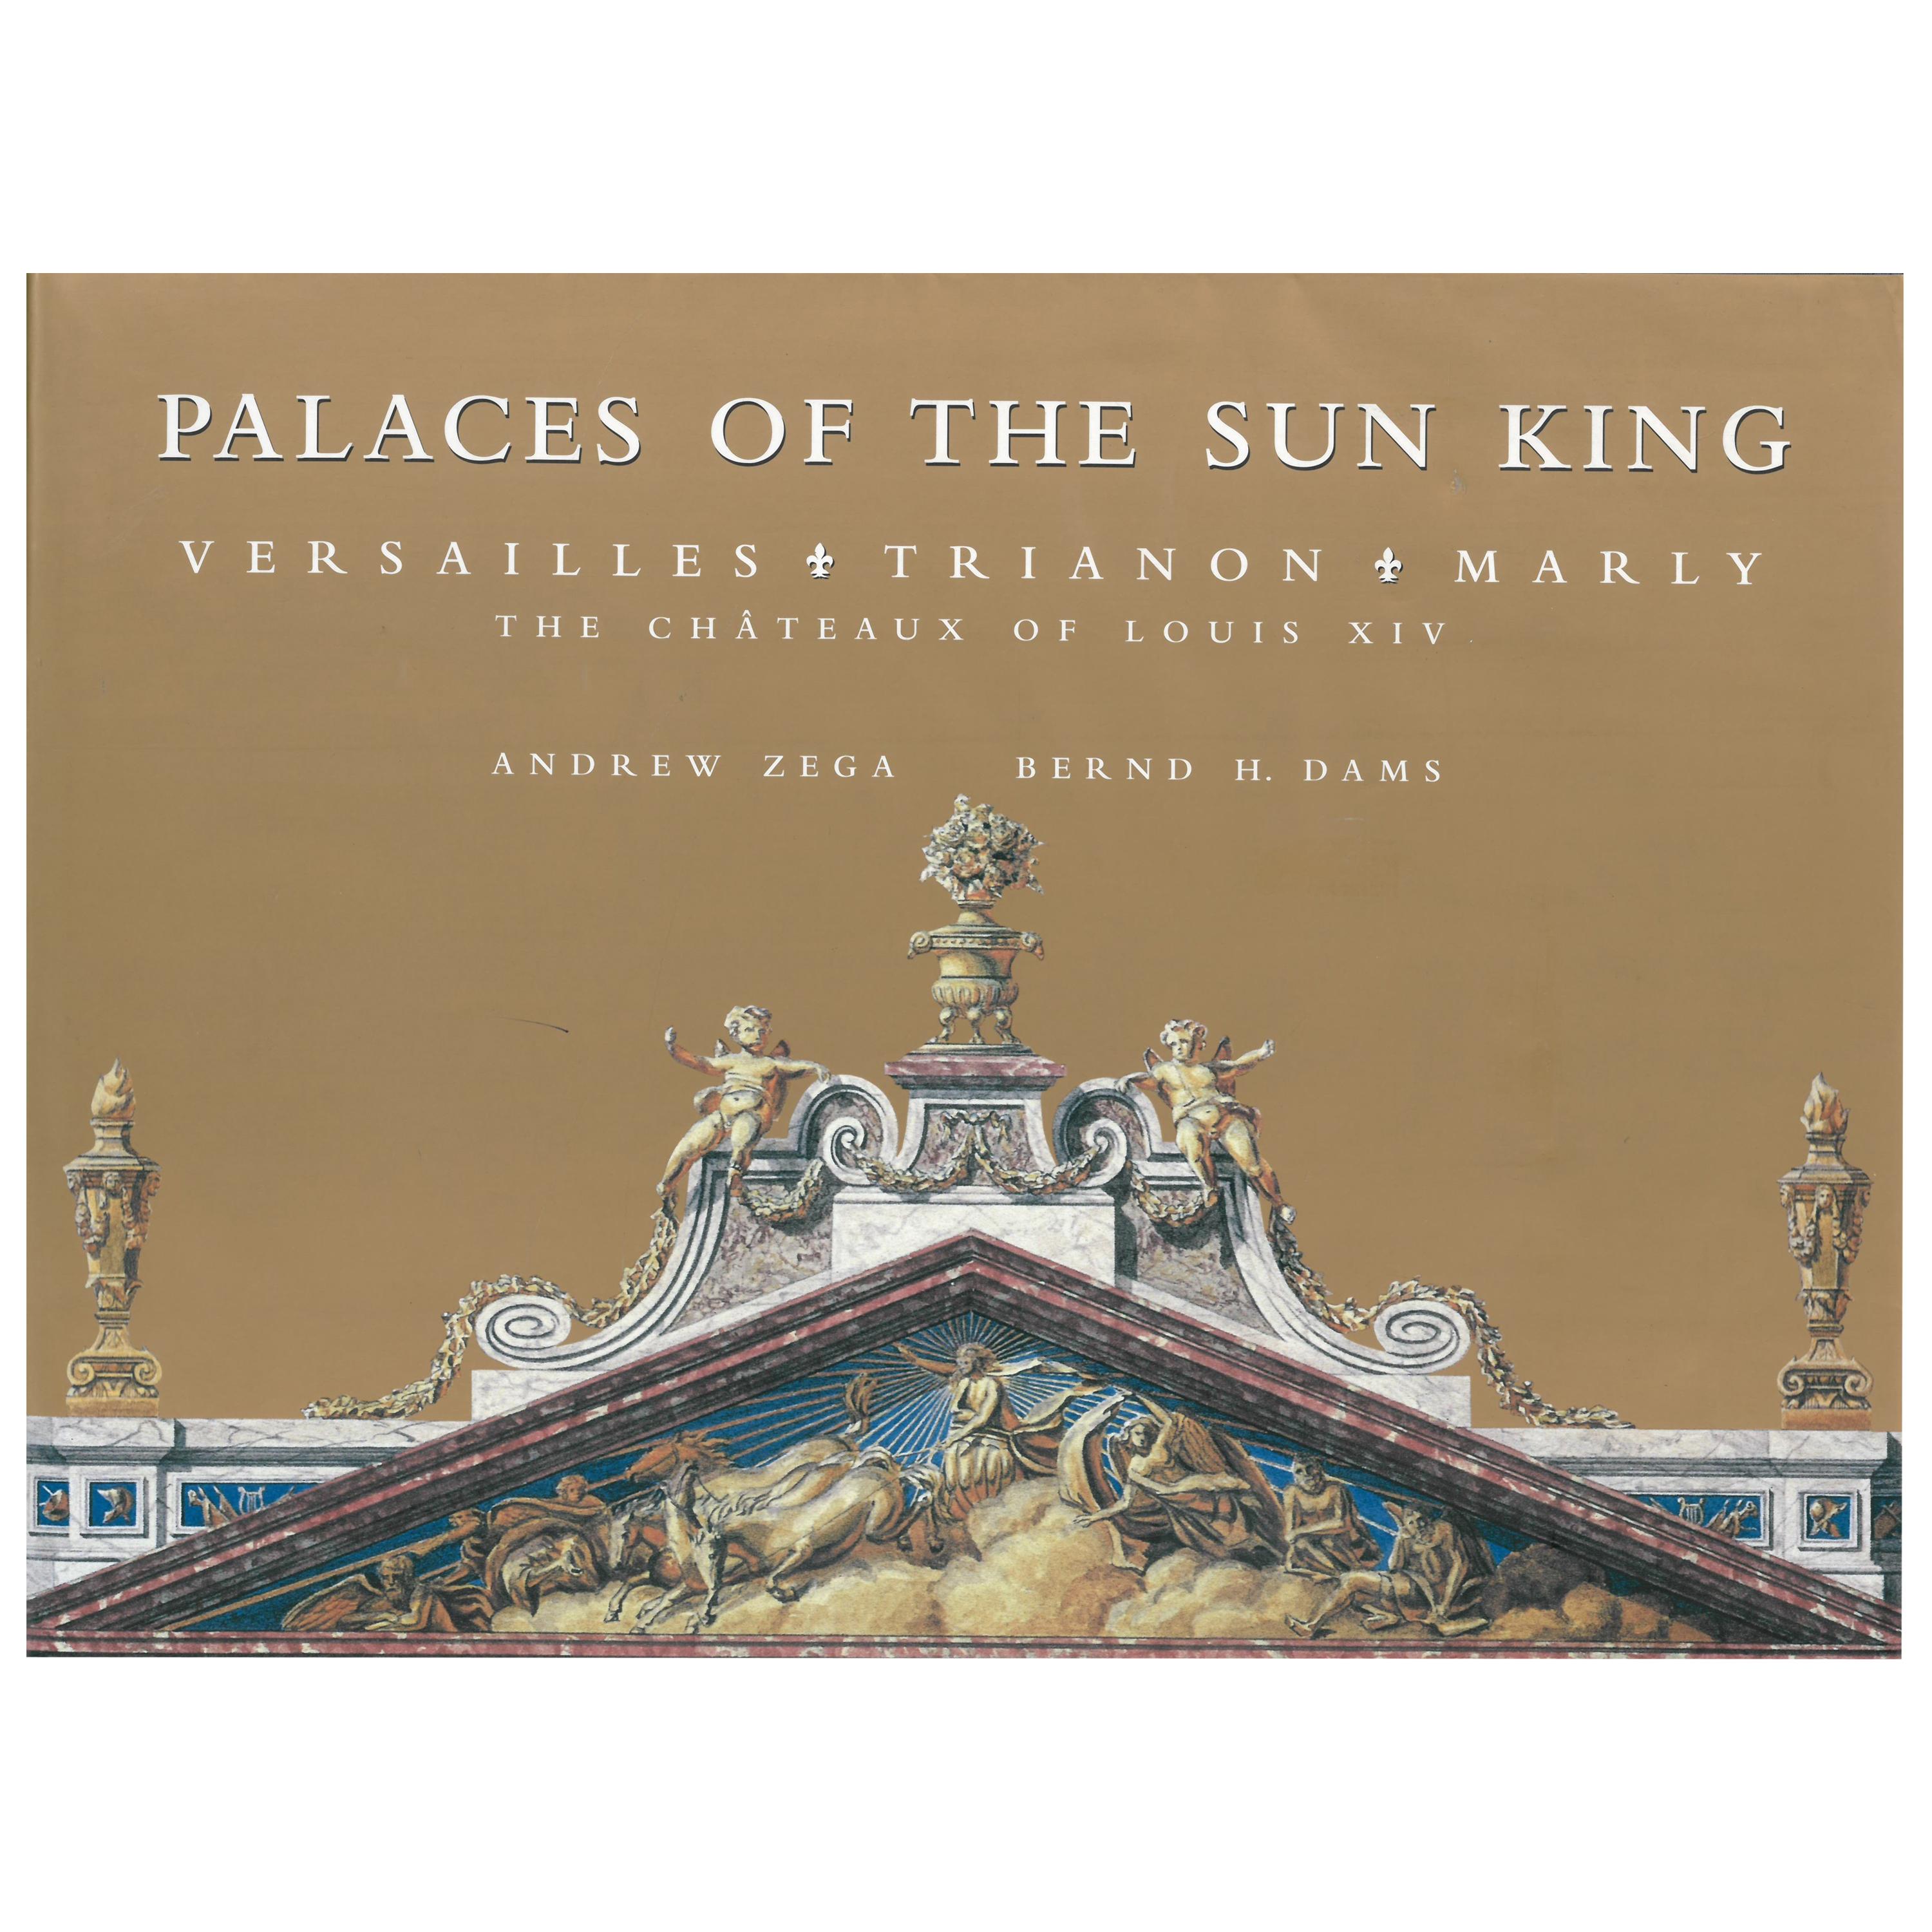 Palaces of the Sun King Versailles, Trianon, Marly, The Chateaux of Loius XIV